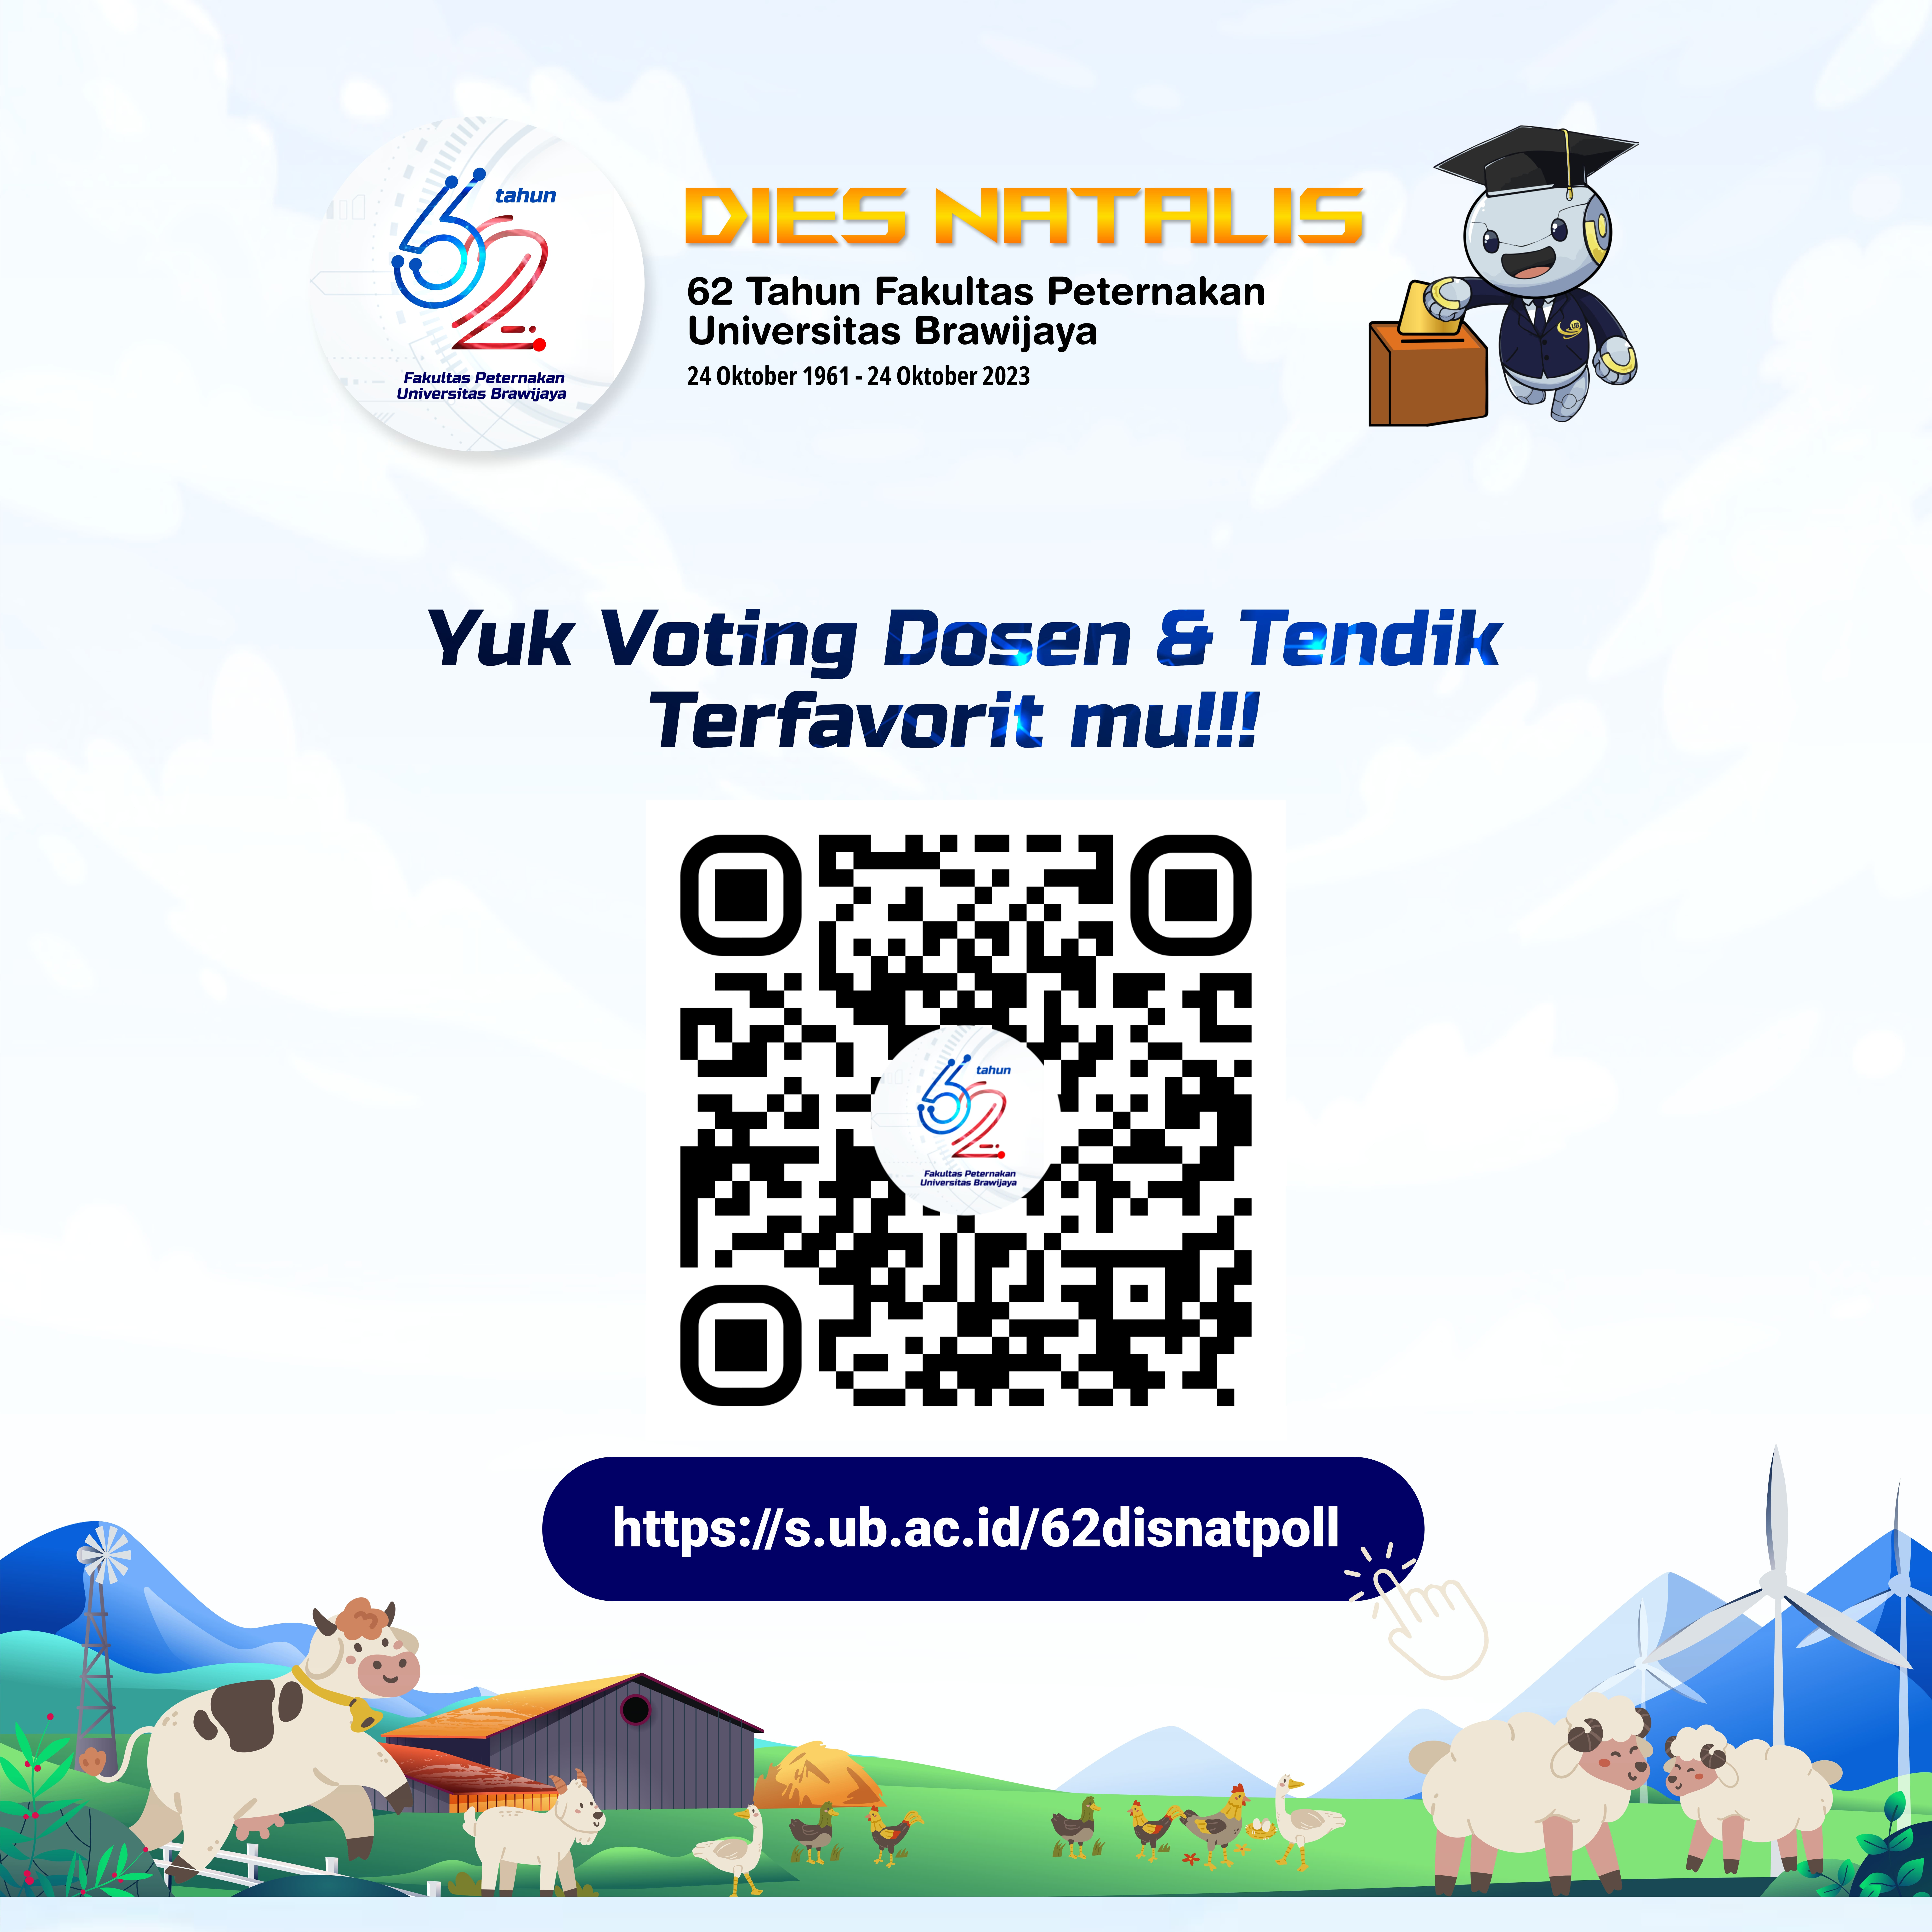 Come on, take part in the voting for your favorite lecturers and teachers, FAPET UB friends